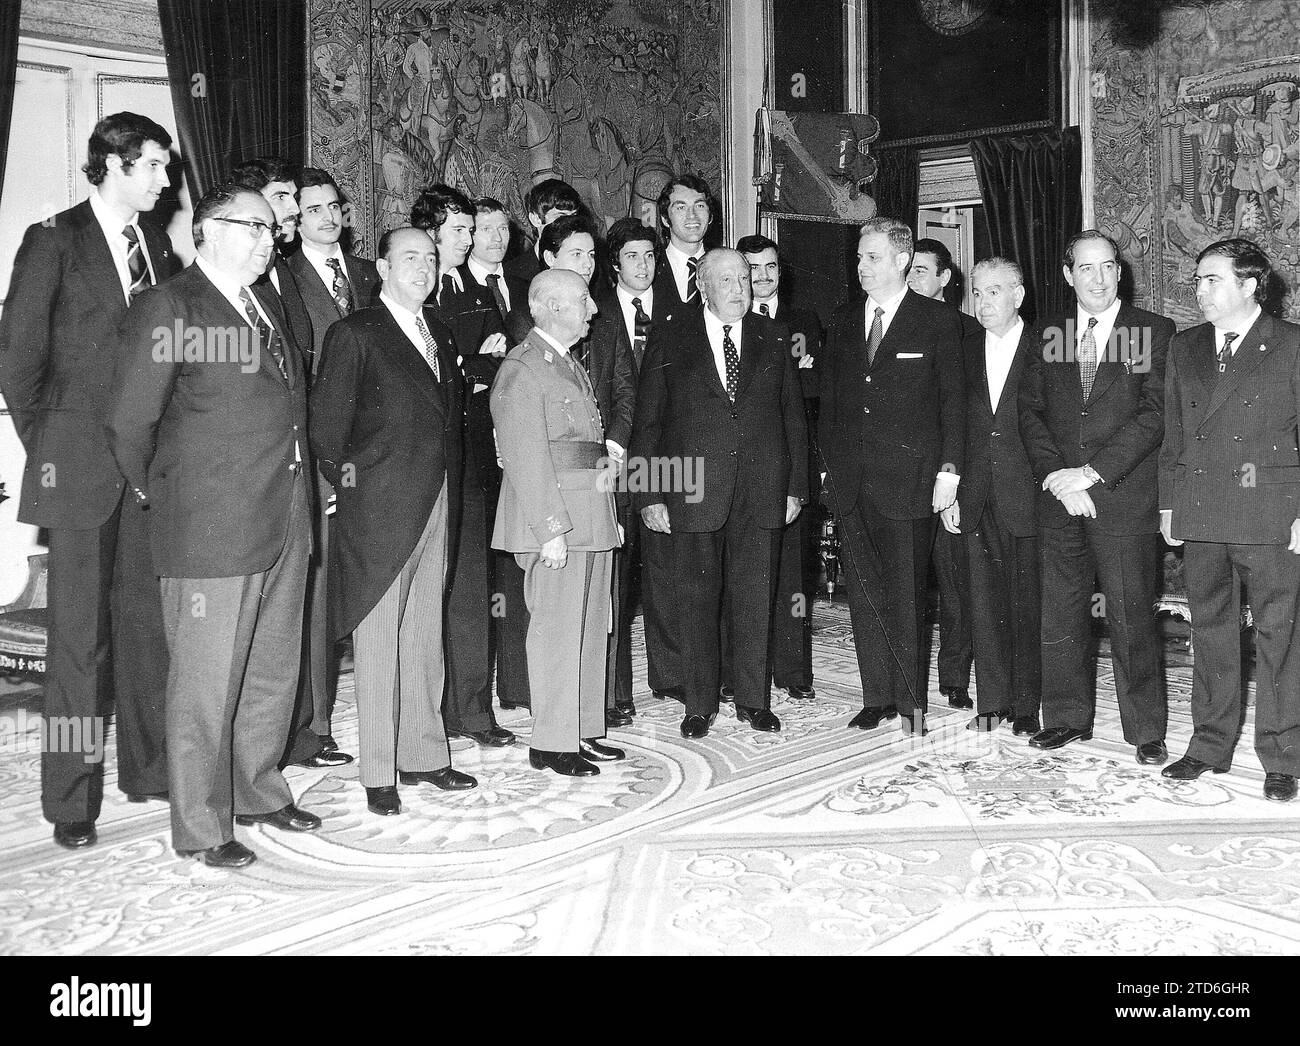 04/16/1974. Franco Receives Real Madrid Basketball, European Champion, the team Chaired by Santiago Bernabeu and accompanied by the general secretary of the movement Jose Utrera Molina, Mr. Juan Gich and Bech de Careda, national delegate of Physical Education and Ernesto Segura de Luna, president of the Spanish Basketball Federation. Credit: Album / Archivo ABC / Manuel Sanz Bermejo Stock Photo